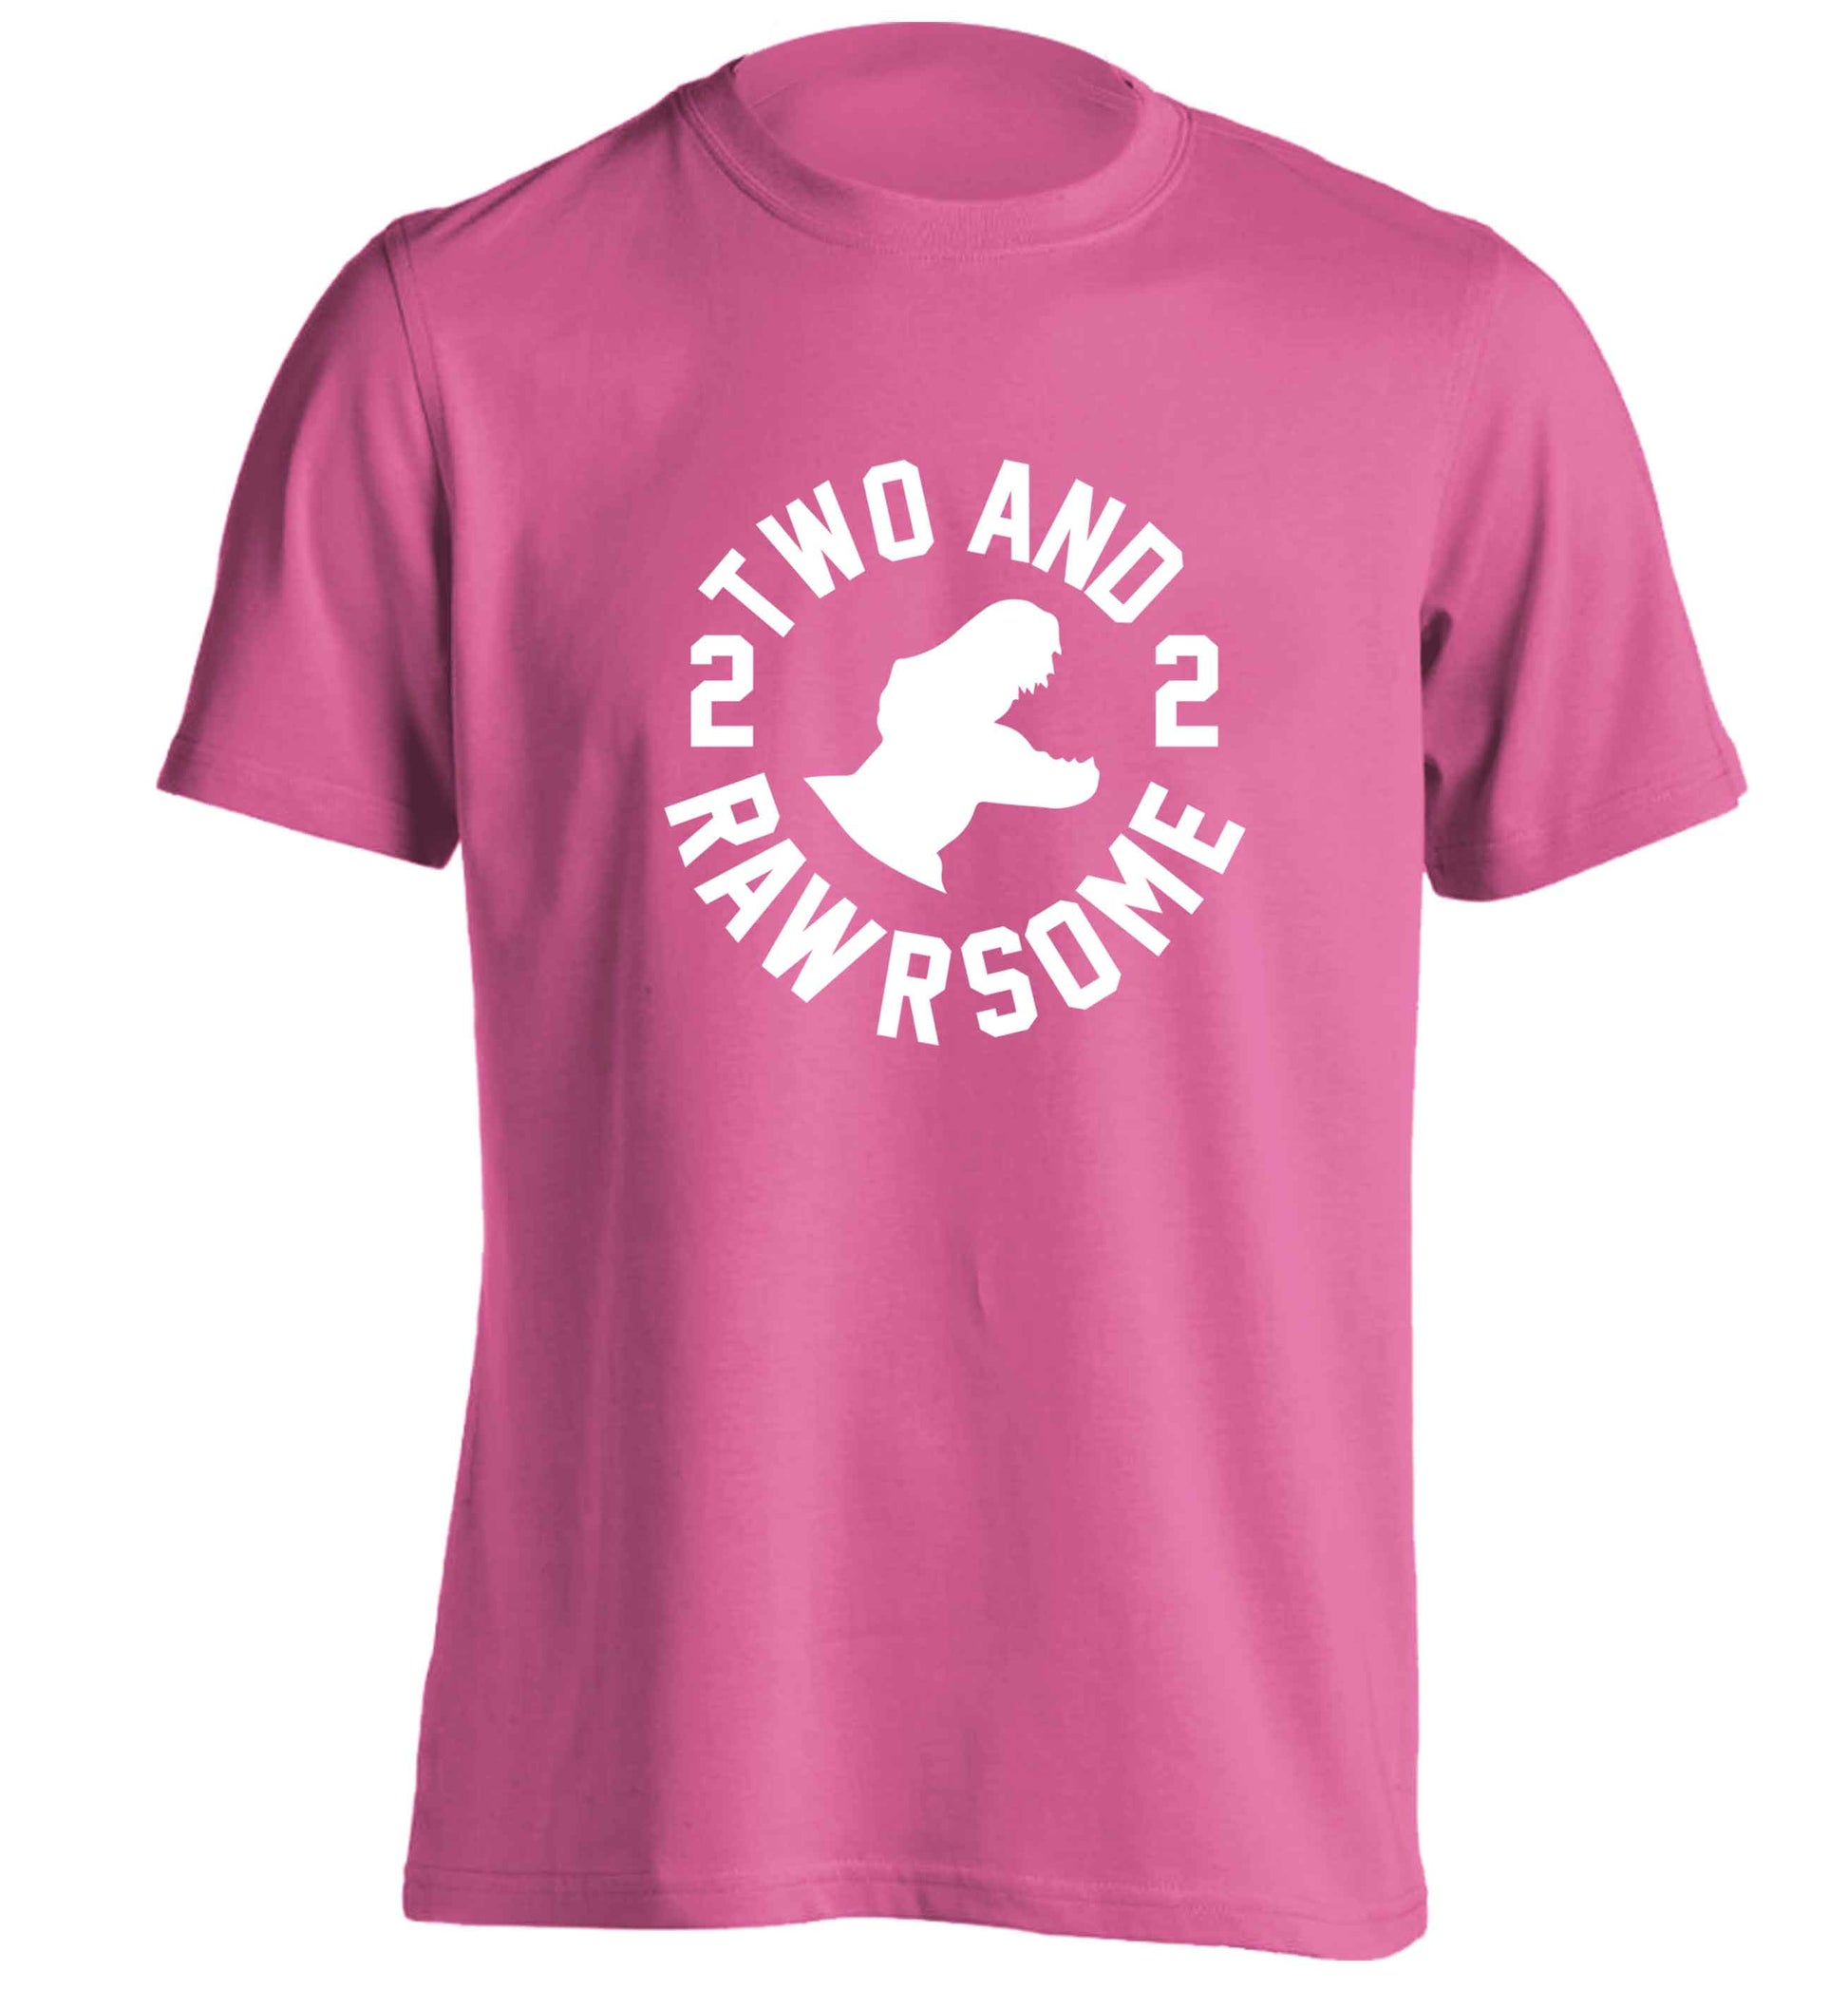 Two and rawrsome adults unisex pink Tshirt 2XL